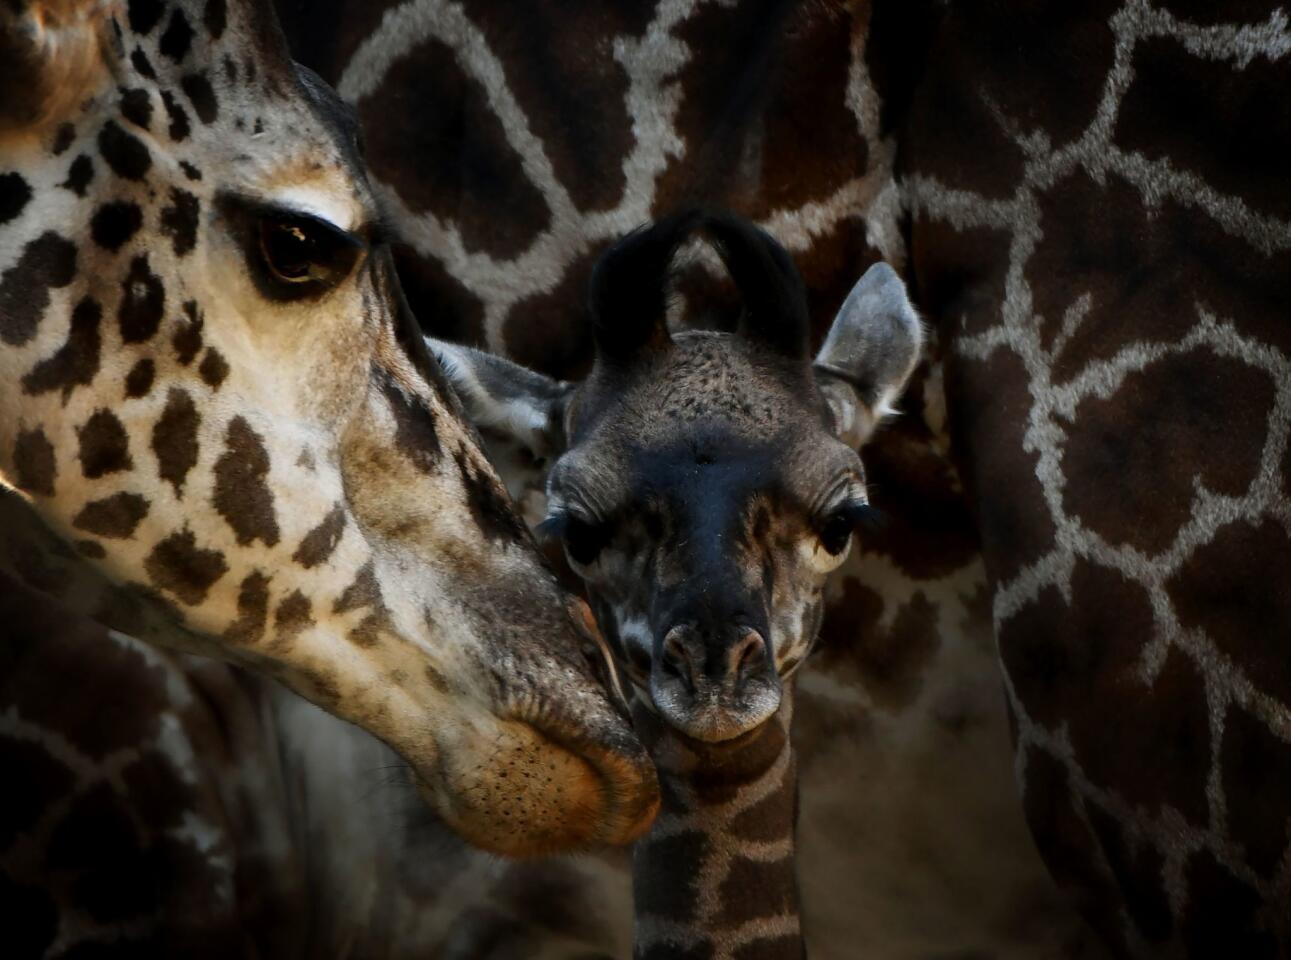 A recently born and unnamed baby female Masai giraffe calf stands with her mother Hasina in its enclosure at the Los Angeles zoo in California on Nov. 22, 2016.